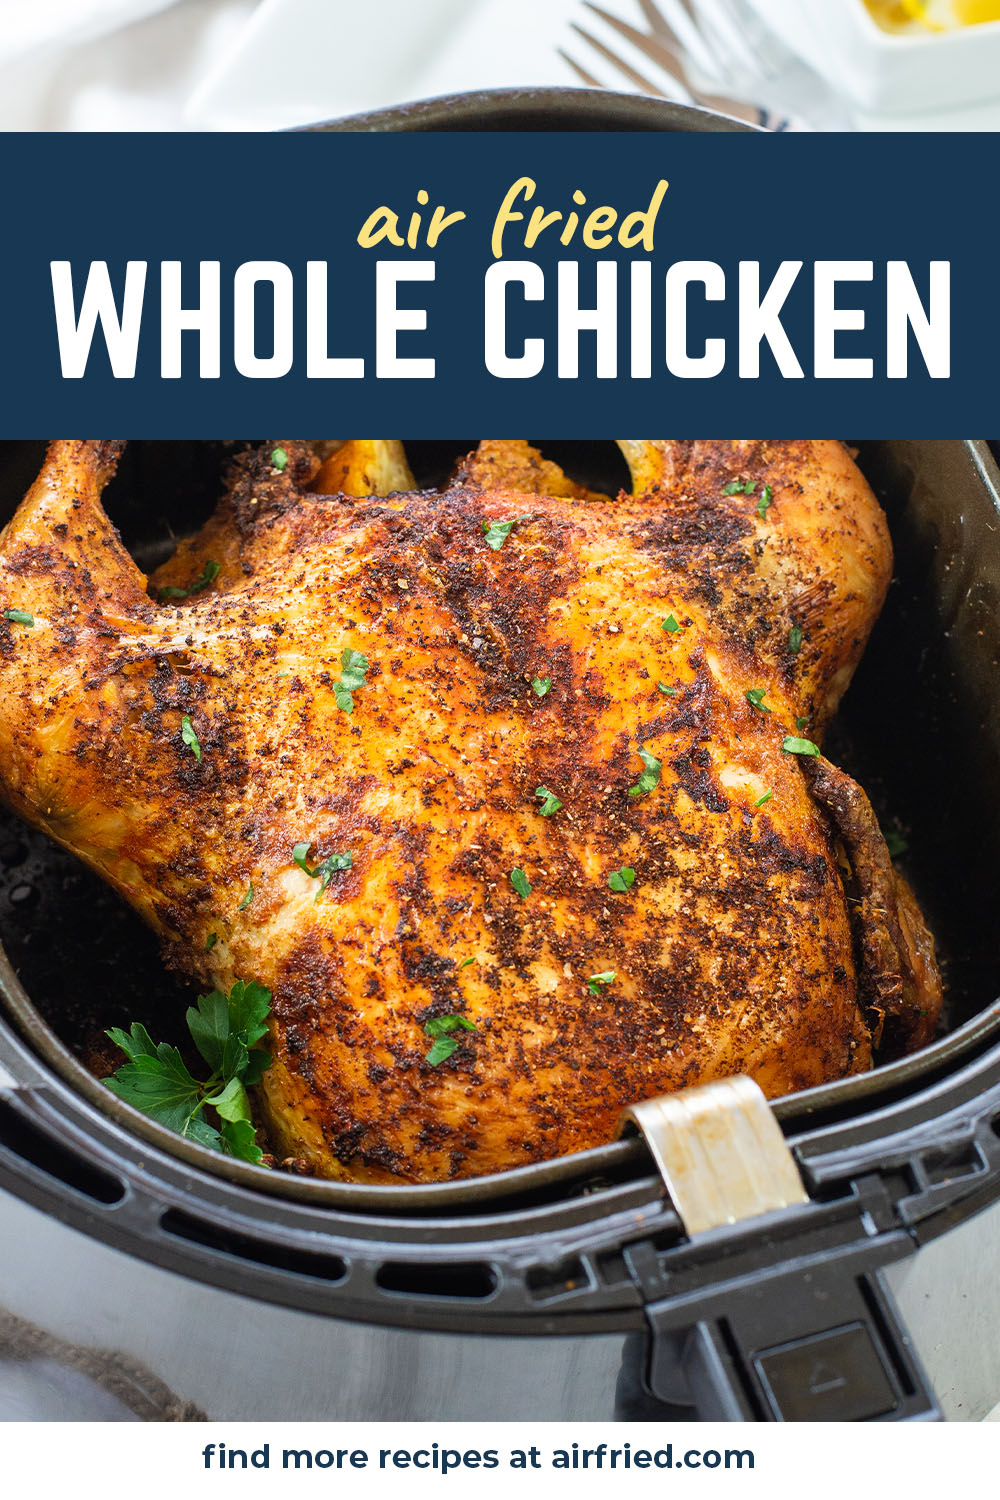 An air fryer basket with a cooked chicken inside.